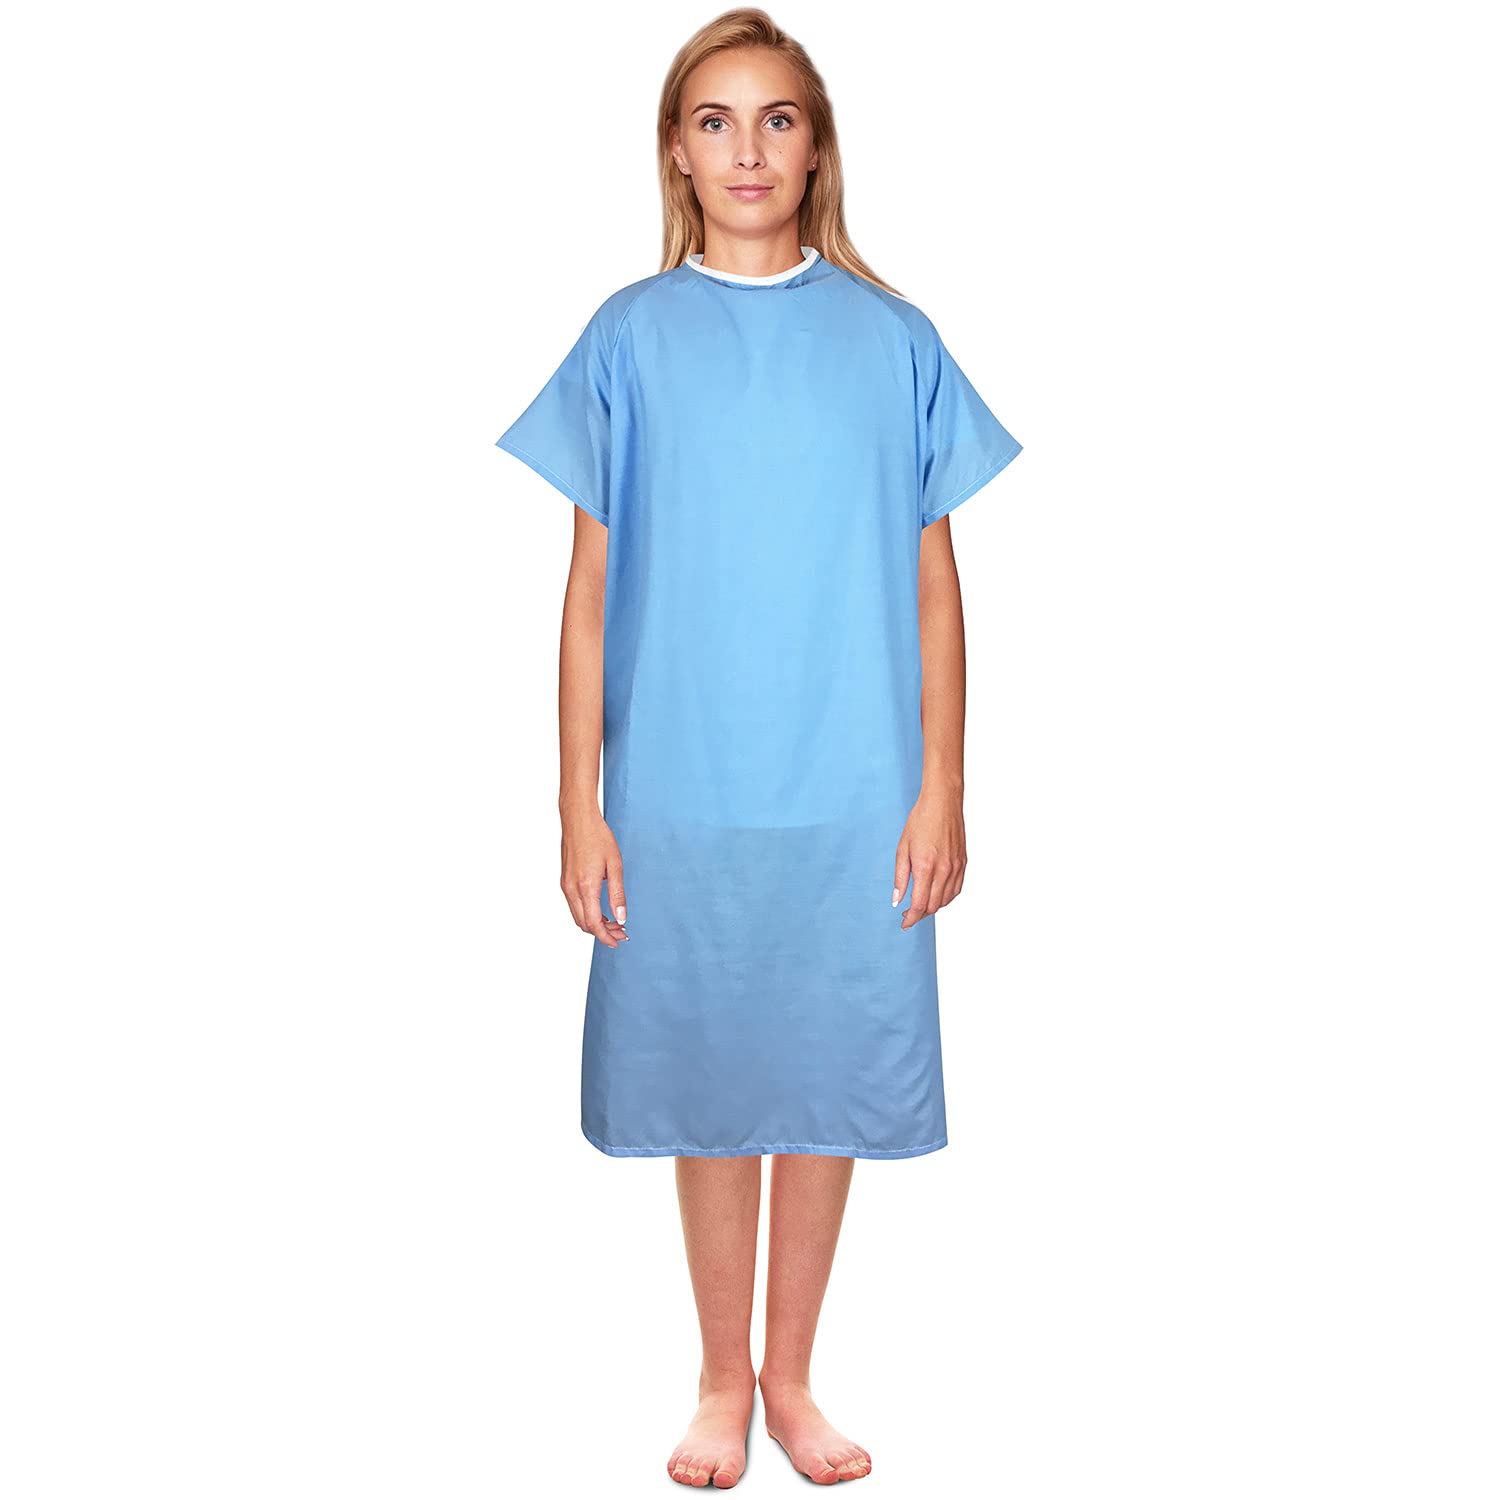 5505 Turtle Blue Patient Exam Gown All Stars Large Pediatric Kid Design